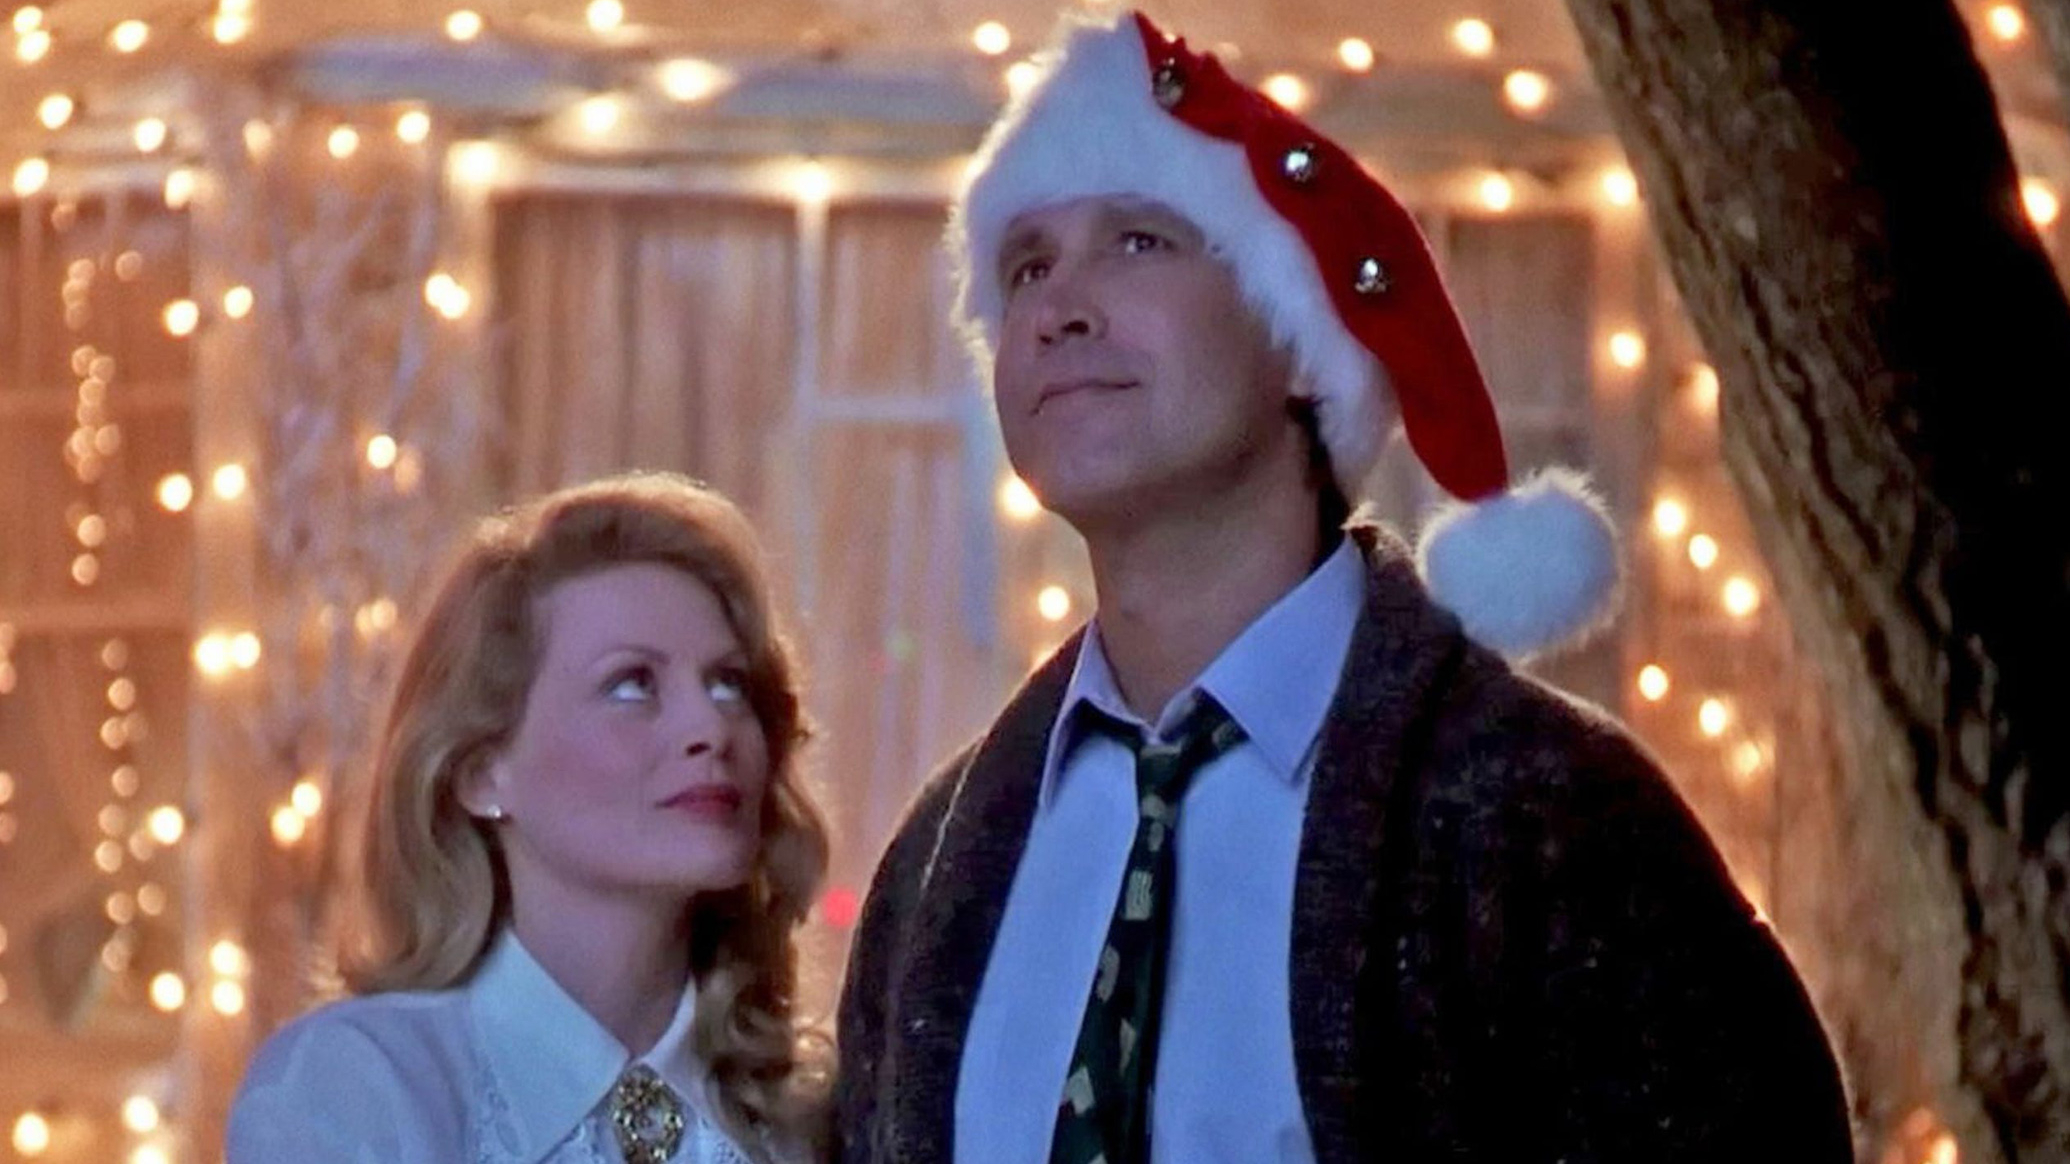 Where to watch National Lampoon's Christmas Vacation